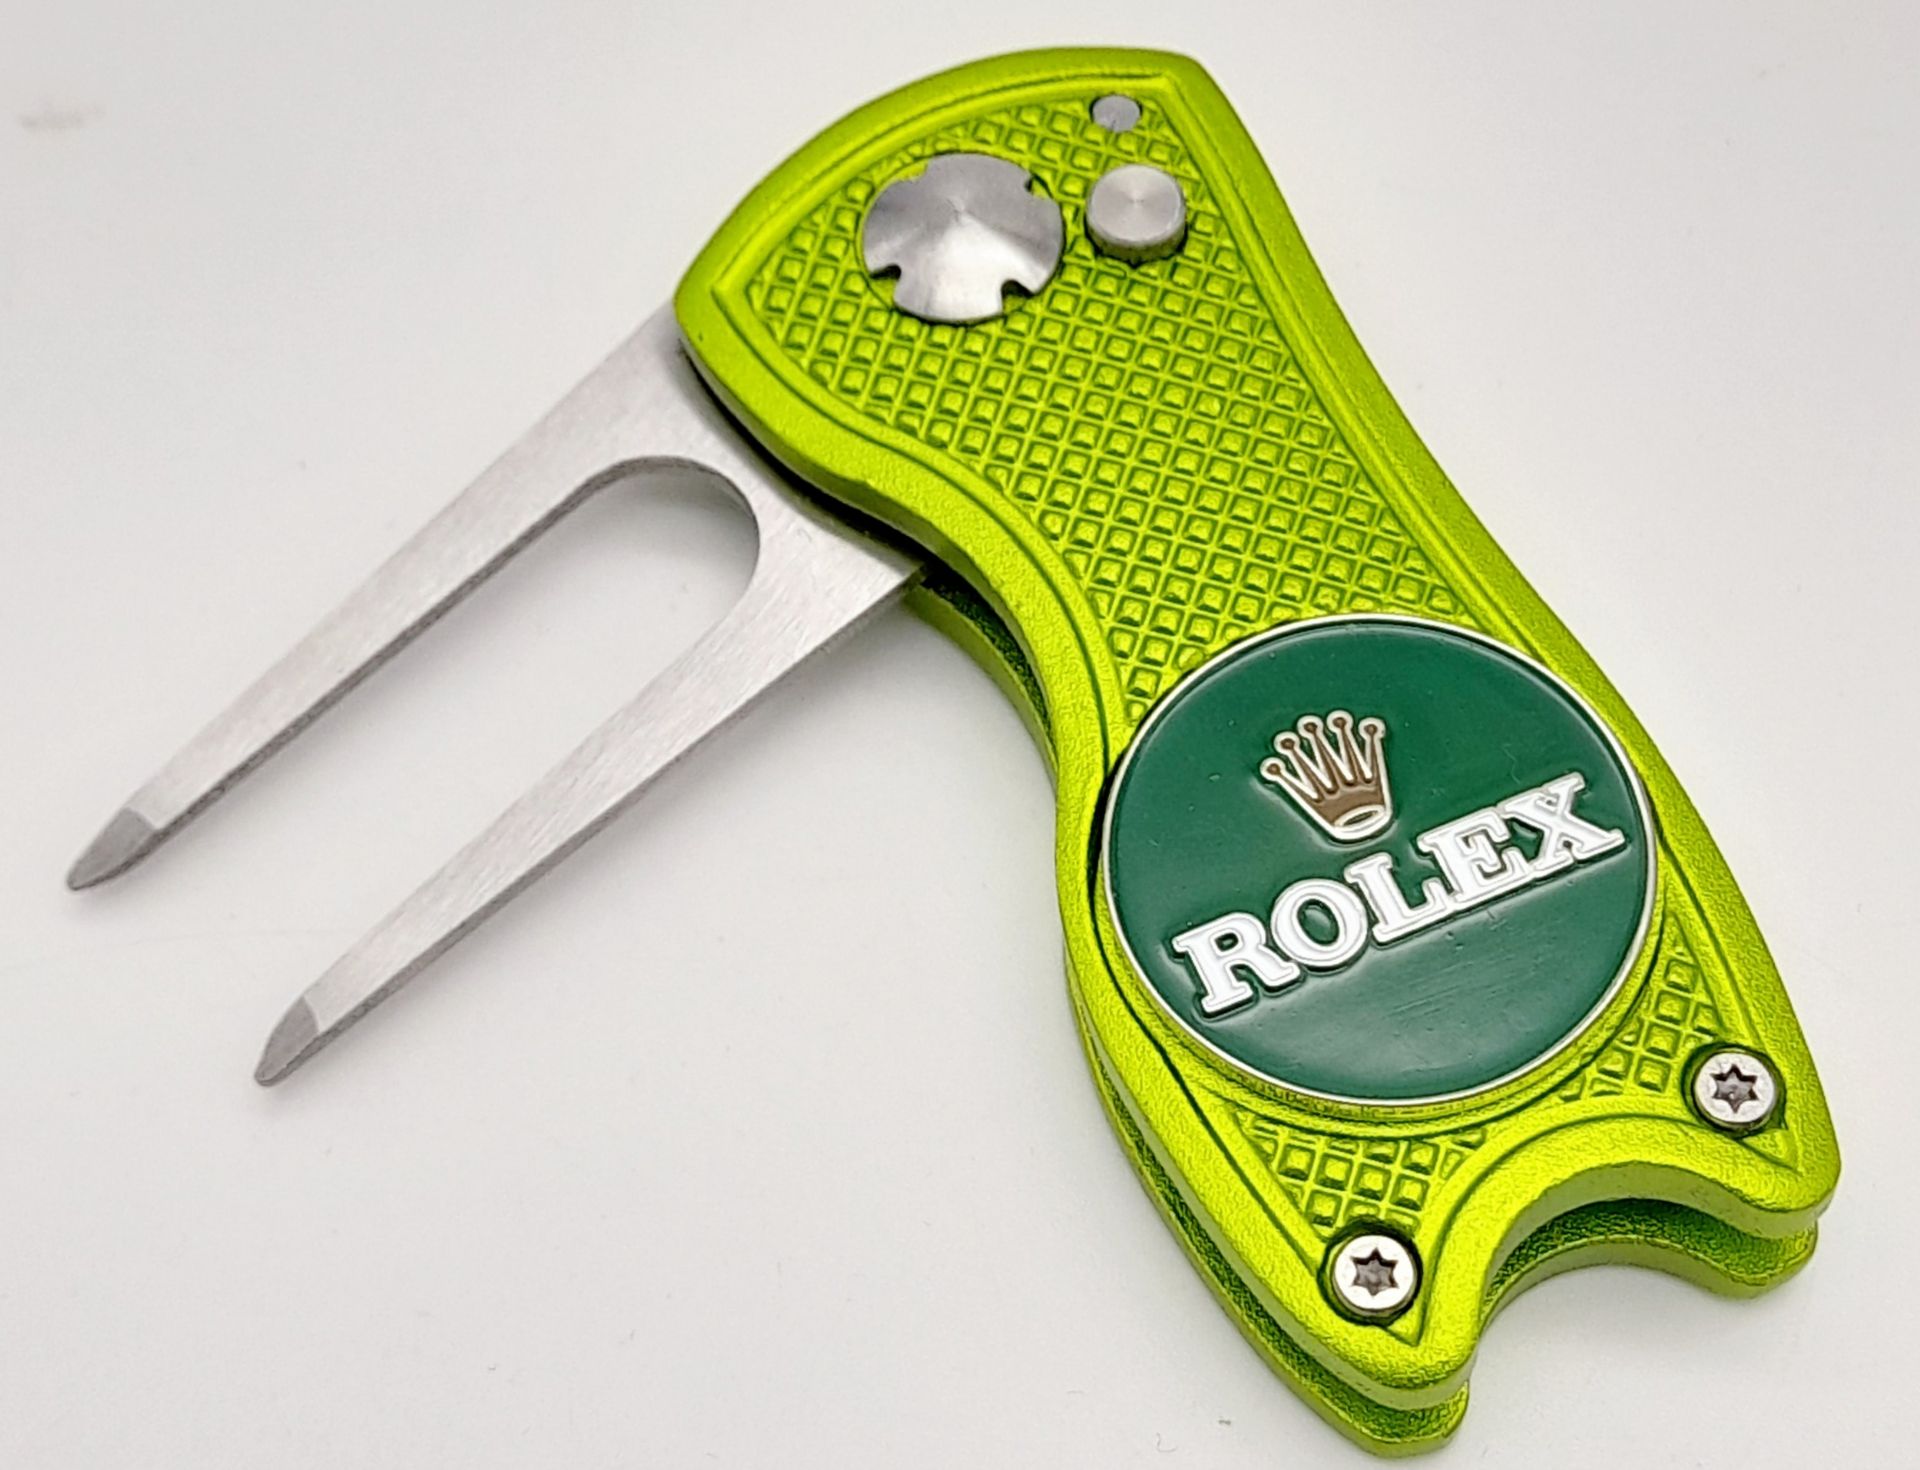 A Rolex Branded Retractable 'Flick' Golf Putting Divot Repair Tool. Removable magnetic ball marker - - Bild 2 aus 4